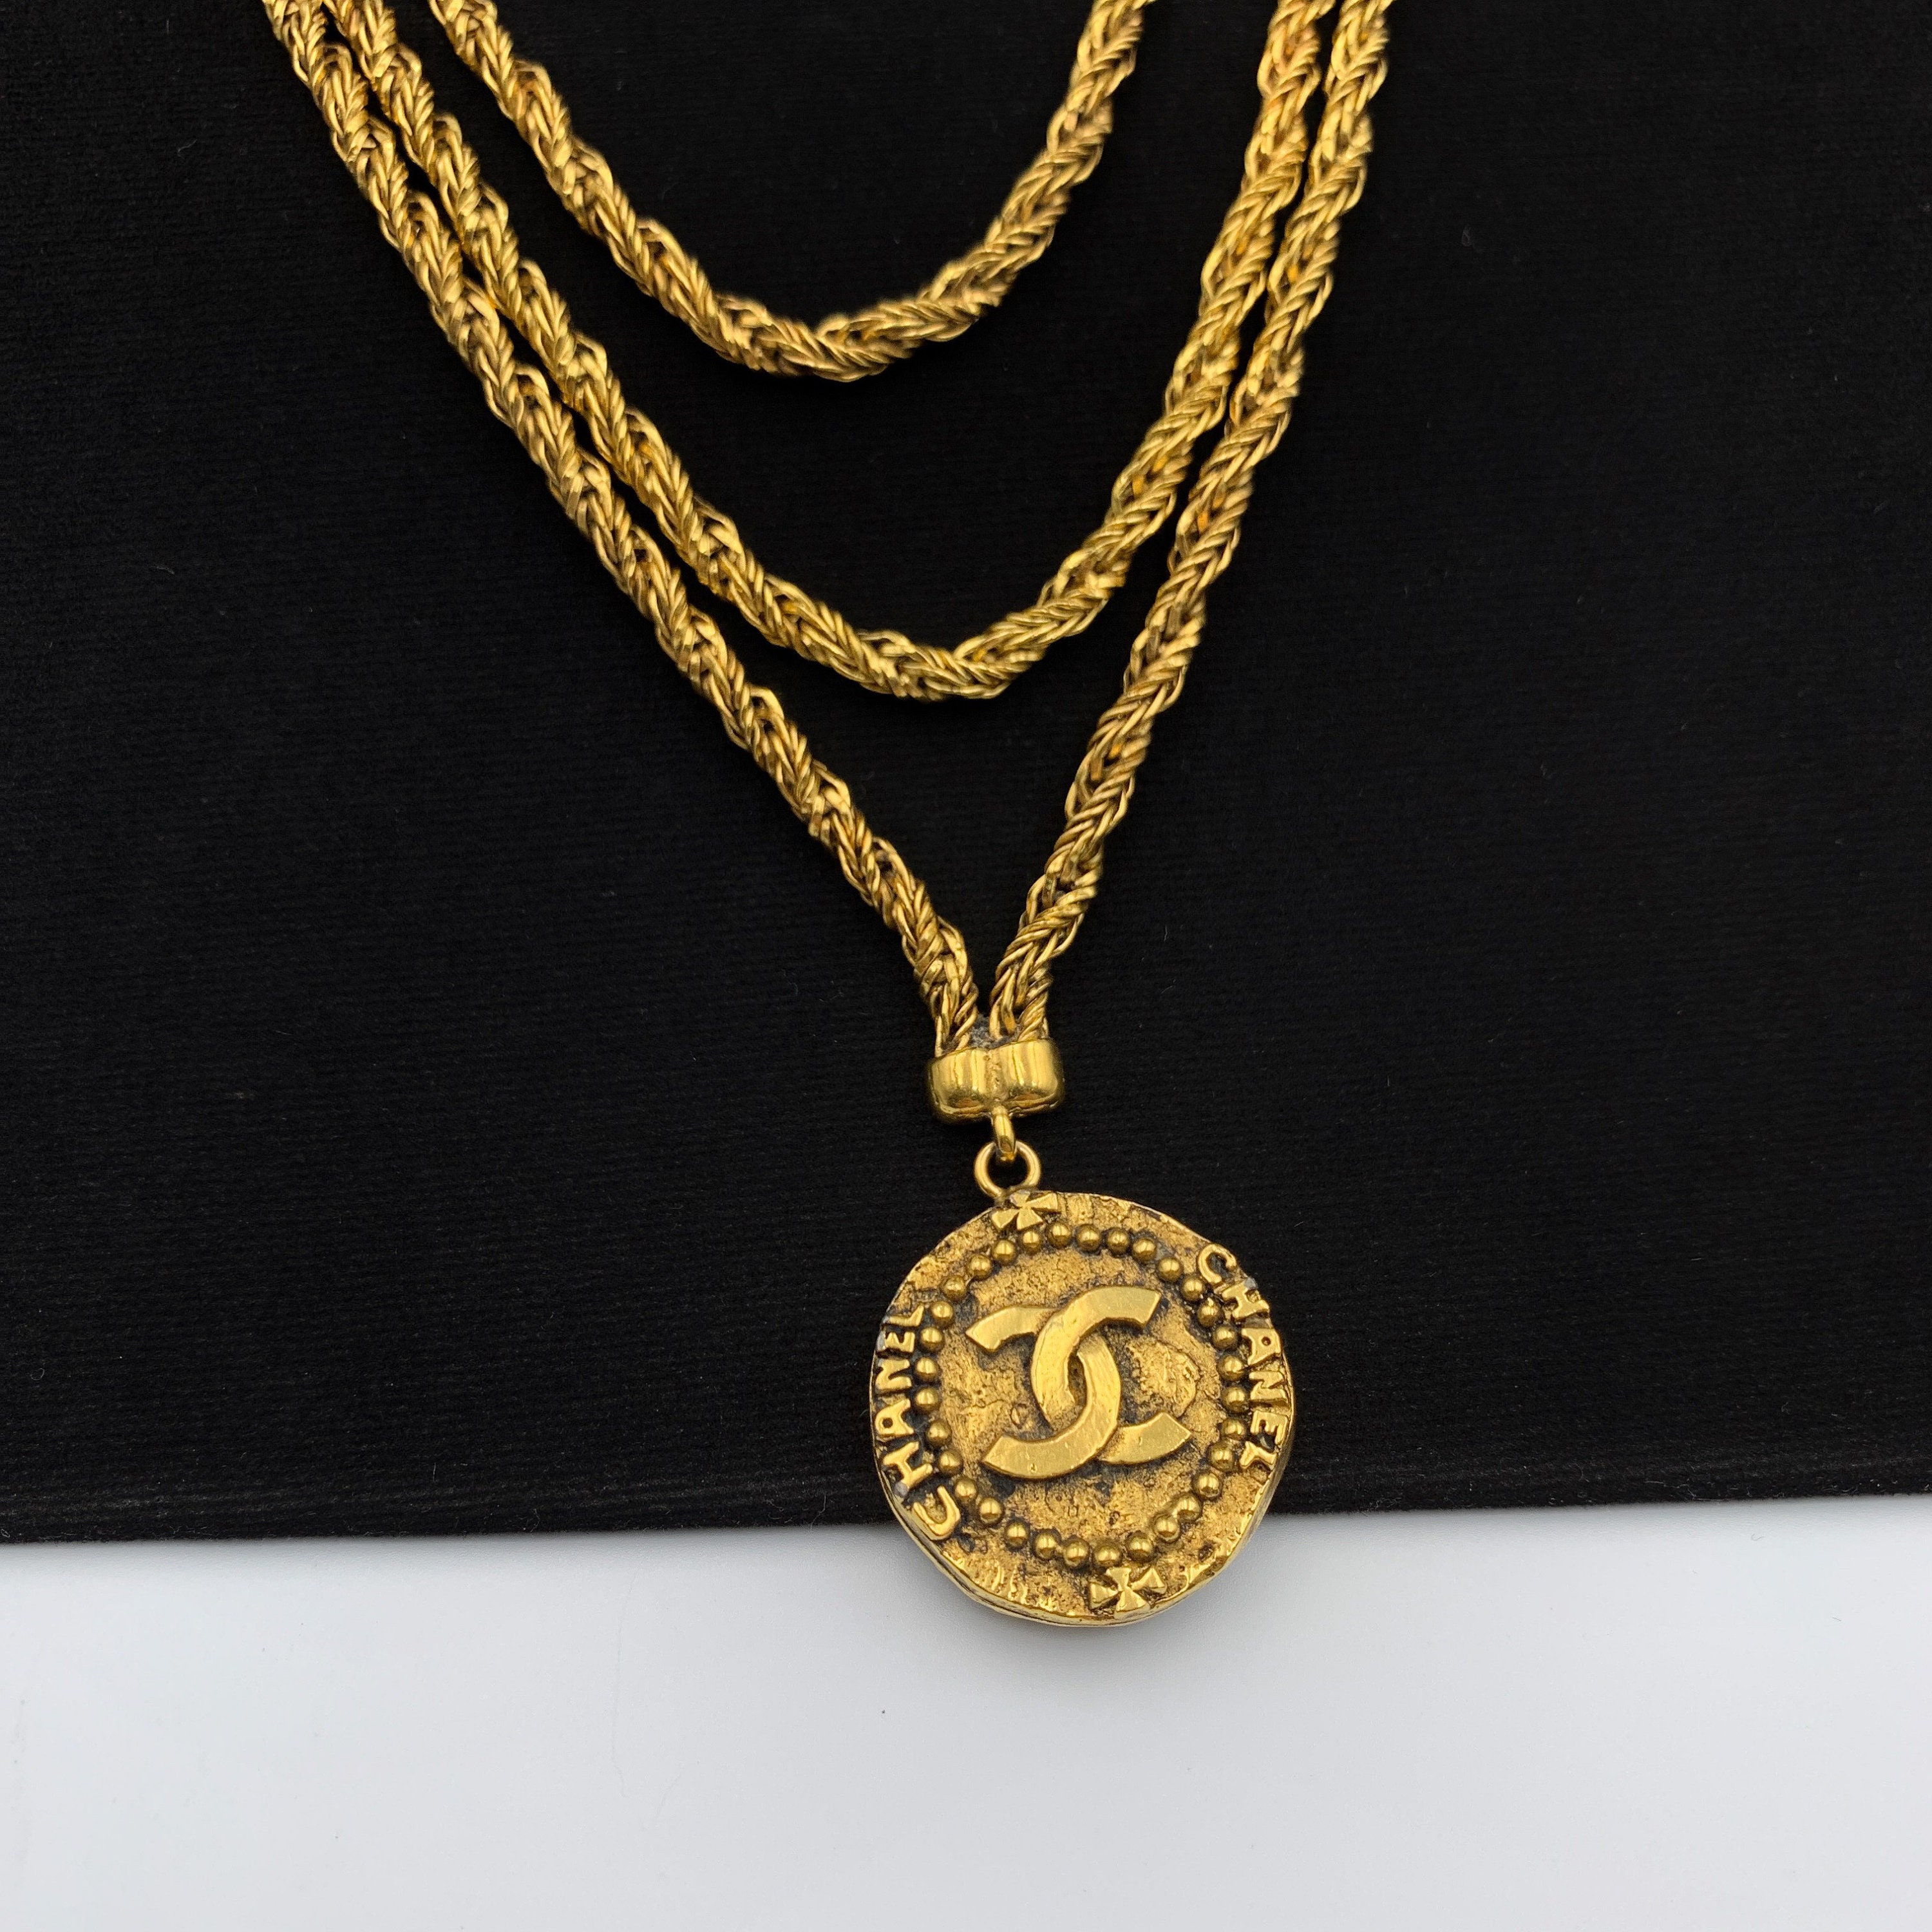 Vintage CHANEL CC Logo Coin Medallion Charm Long Necklace -  Israel